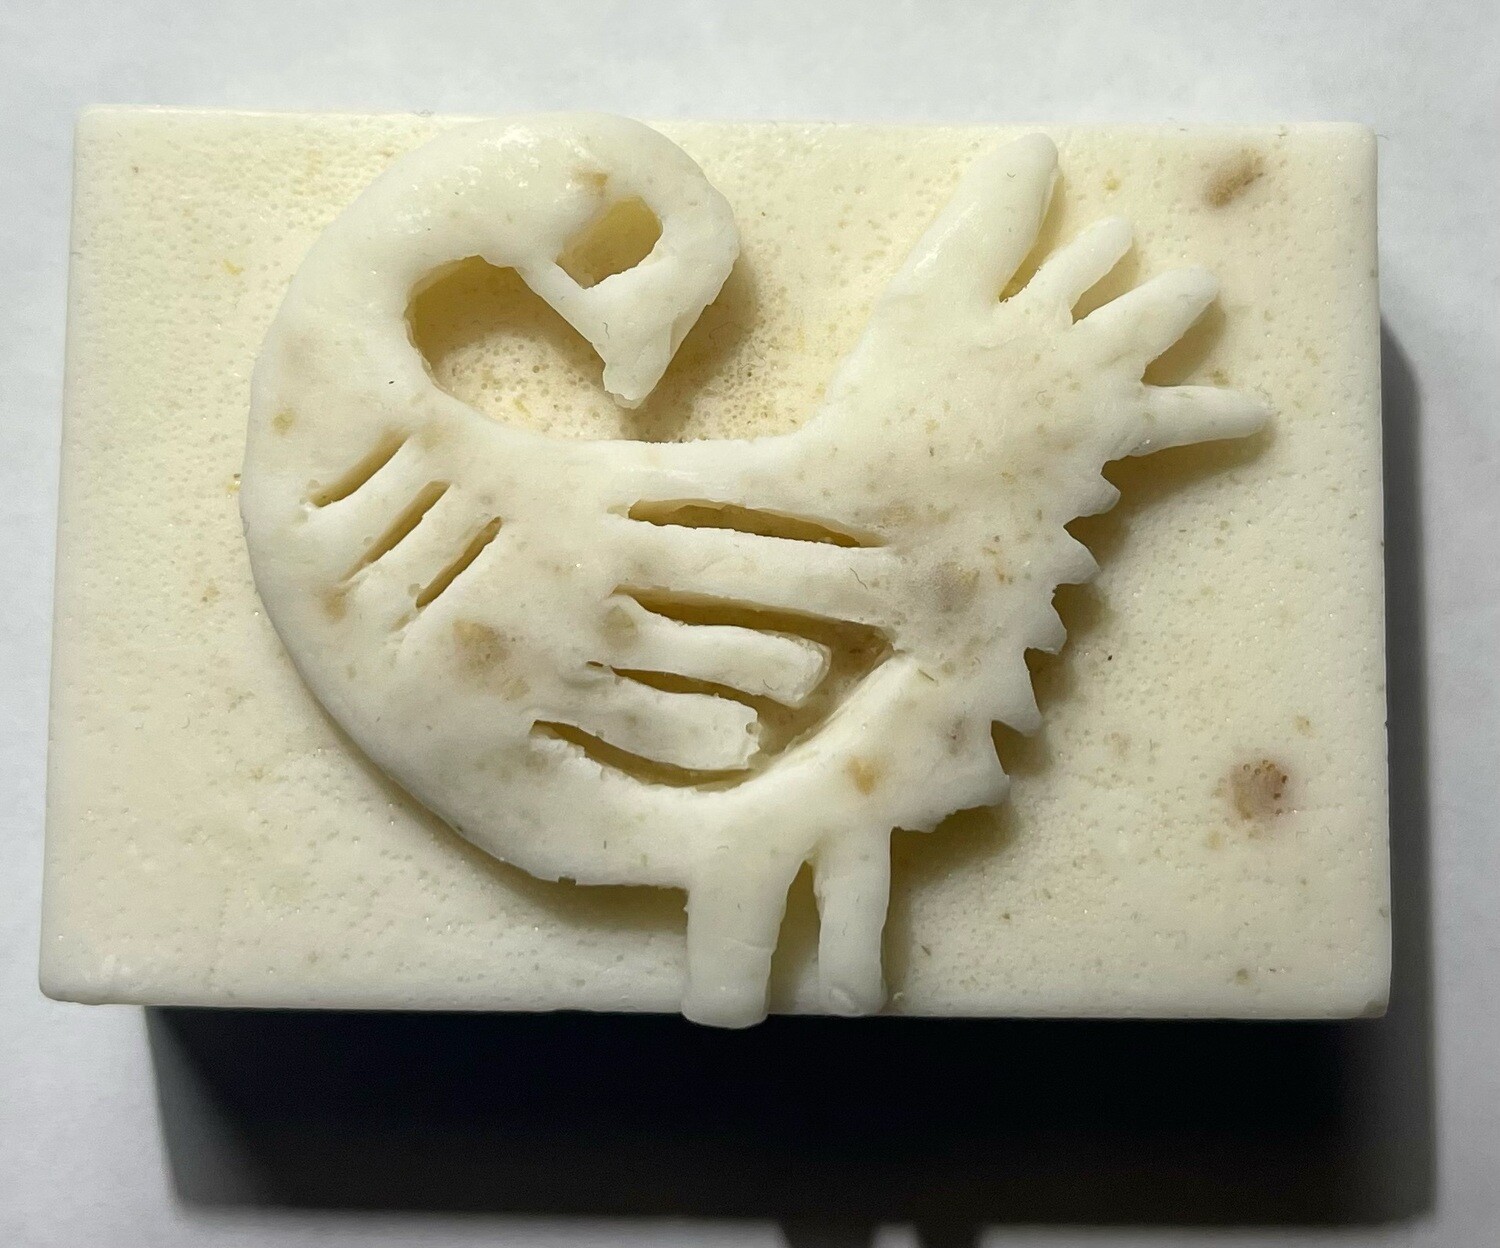 Sankofa (Go Back and Get It) Oatmeal Soap infused with Sea Moss